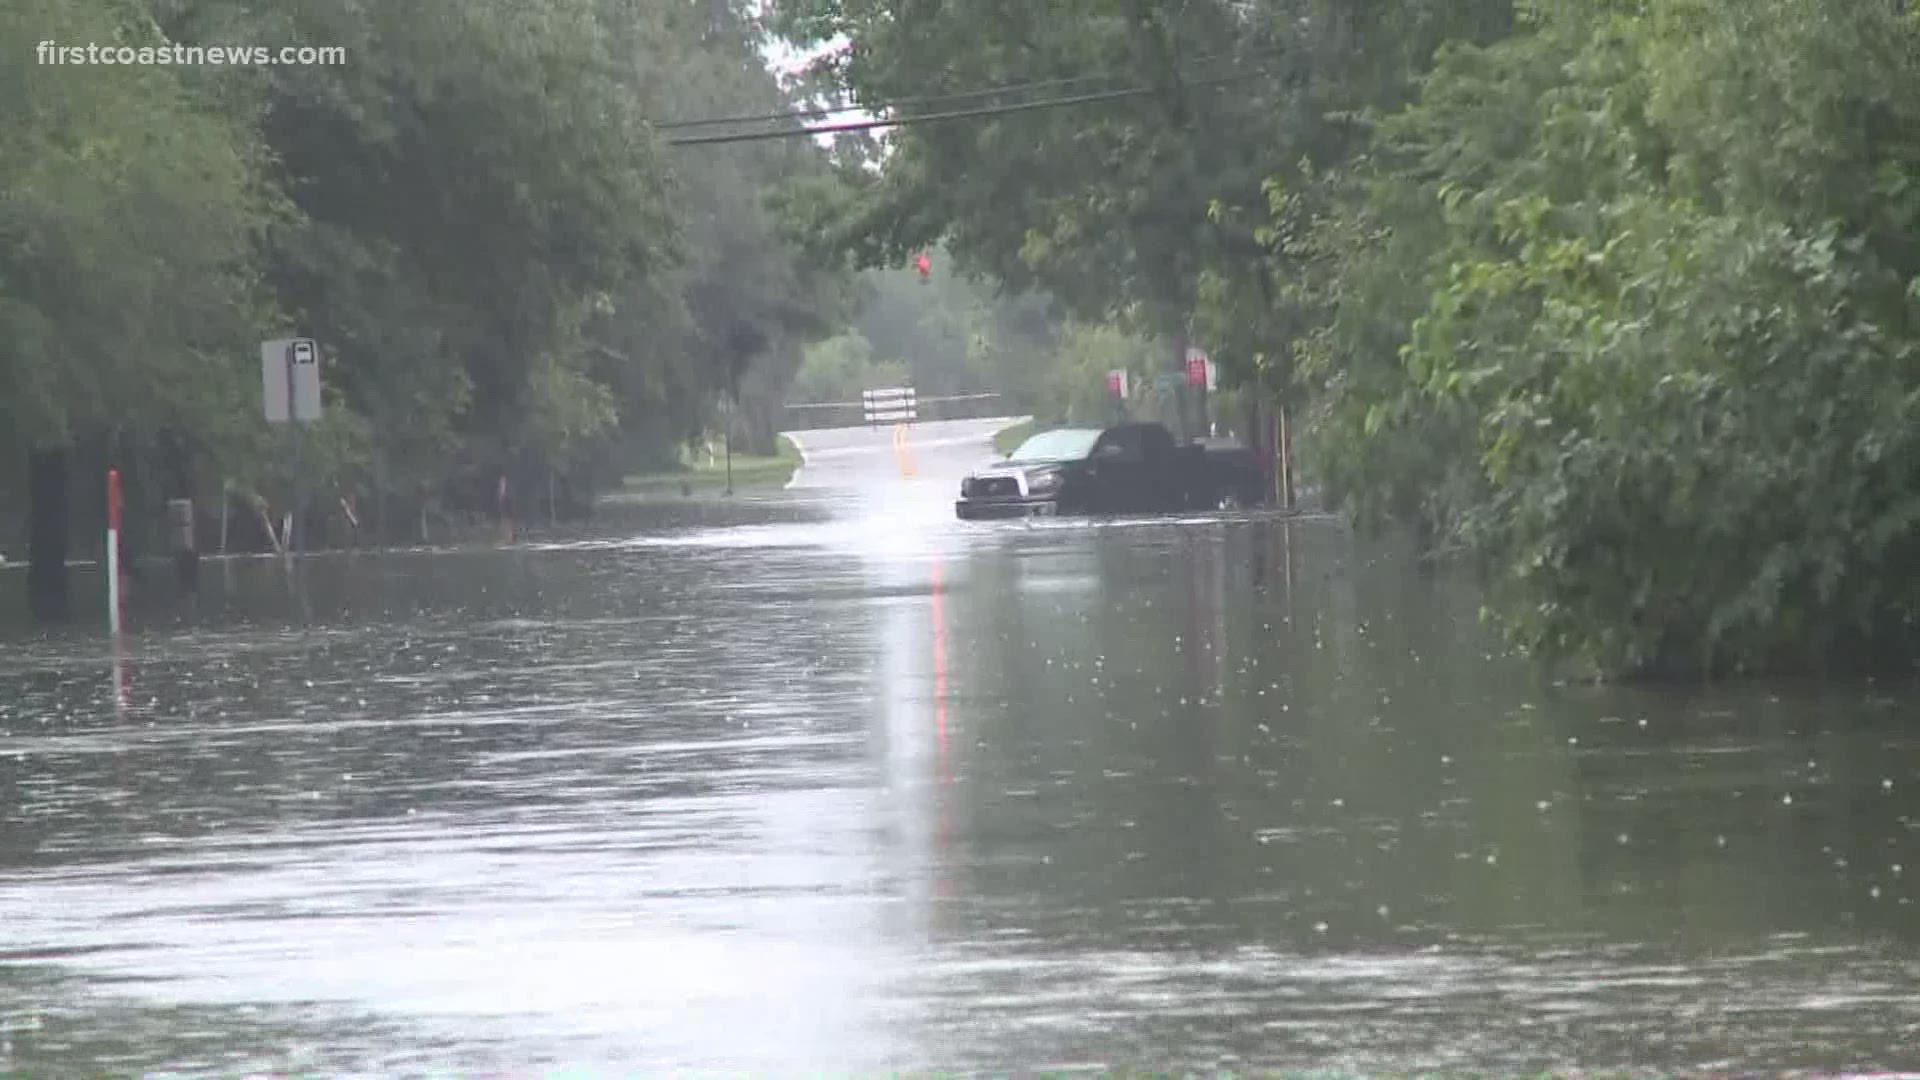 Some areas along the First Coast experienced excessive flooding Sunday, according to the National Weather Service.